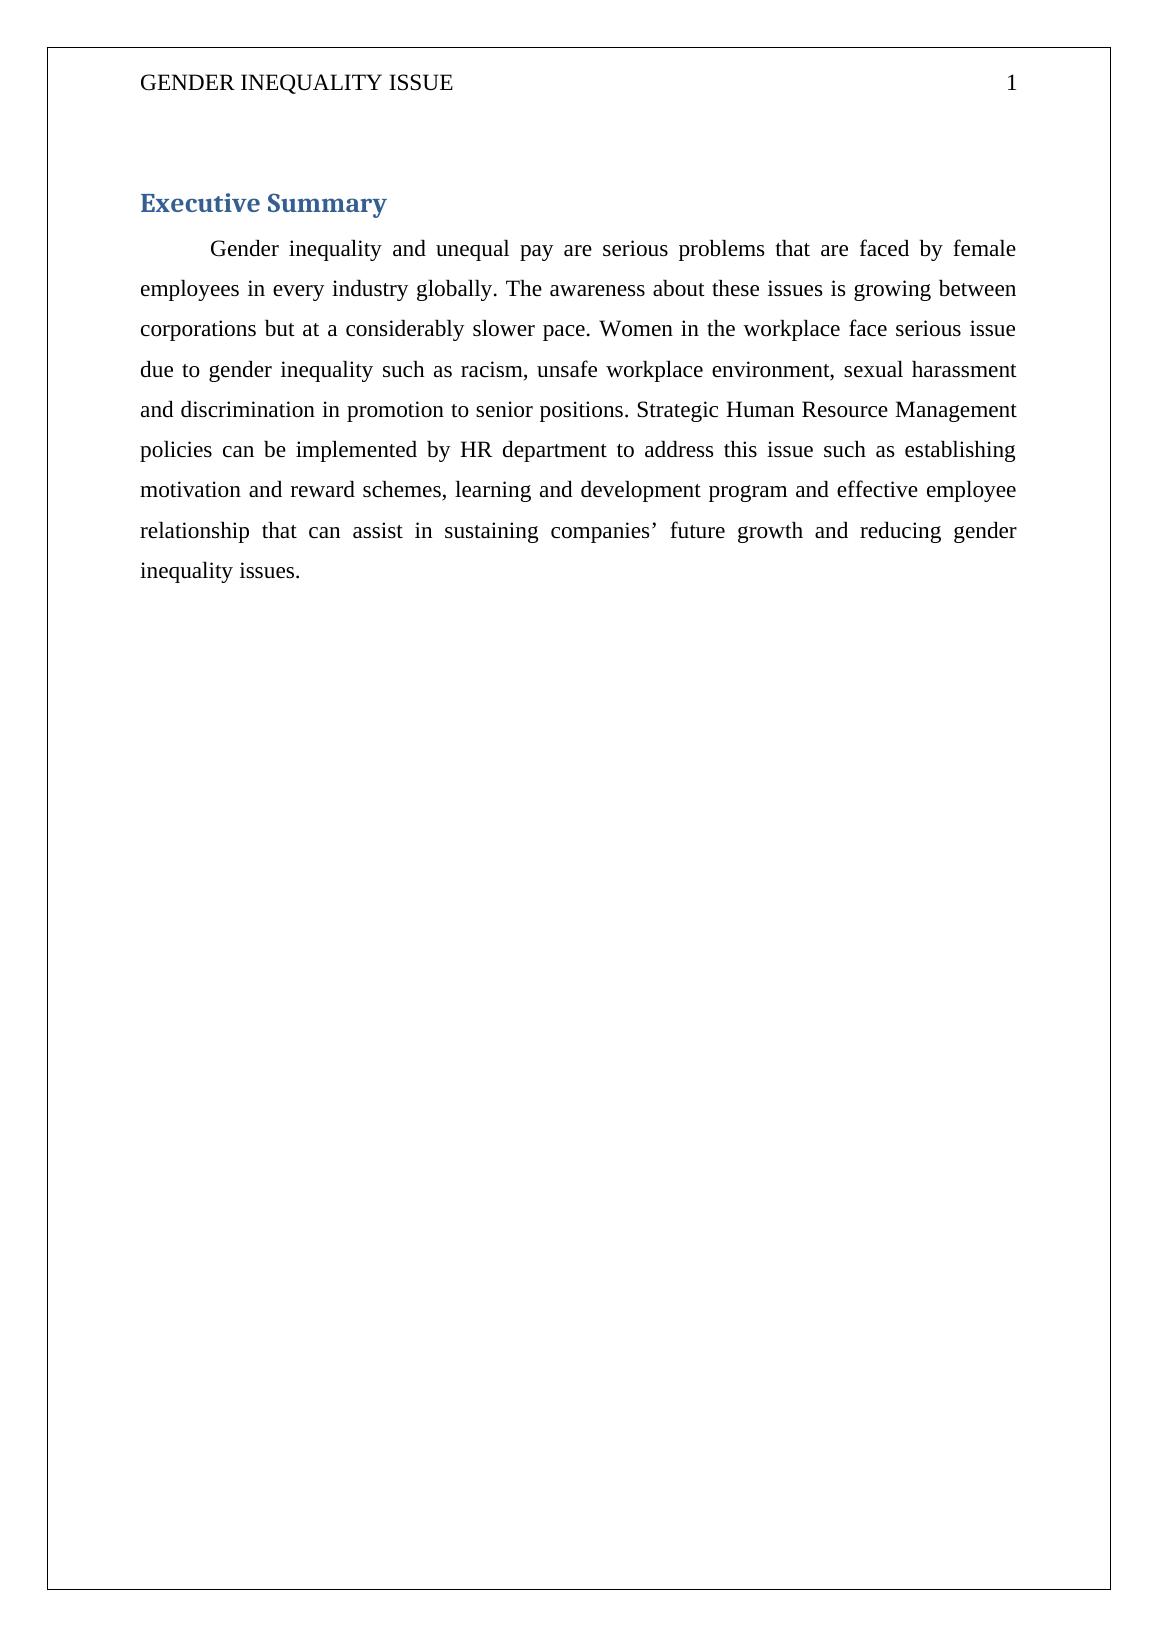 Gender Inequality Issues - PDF_2